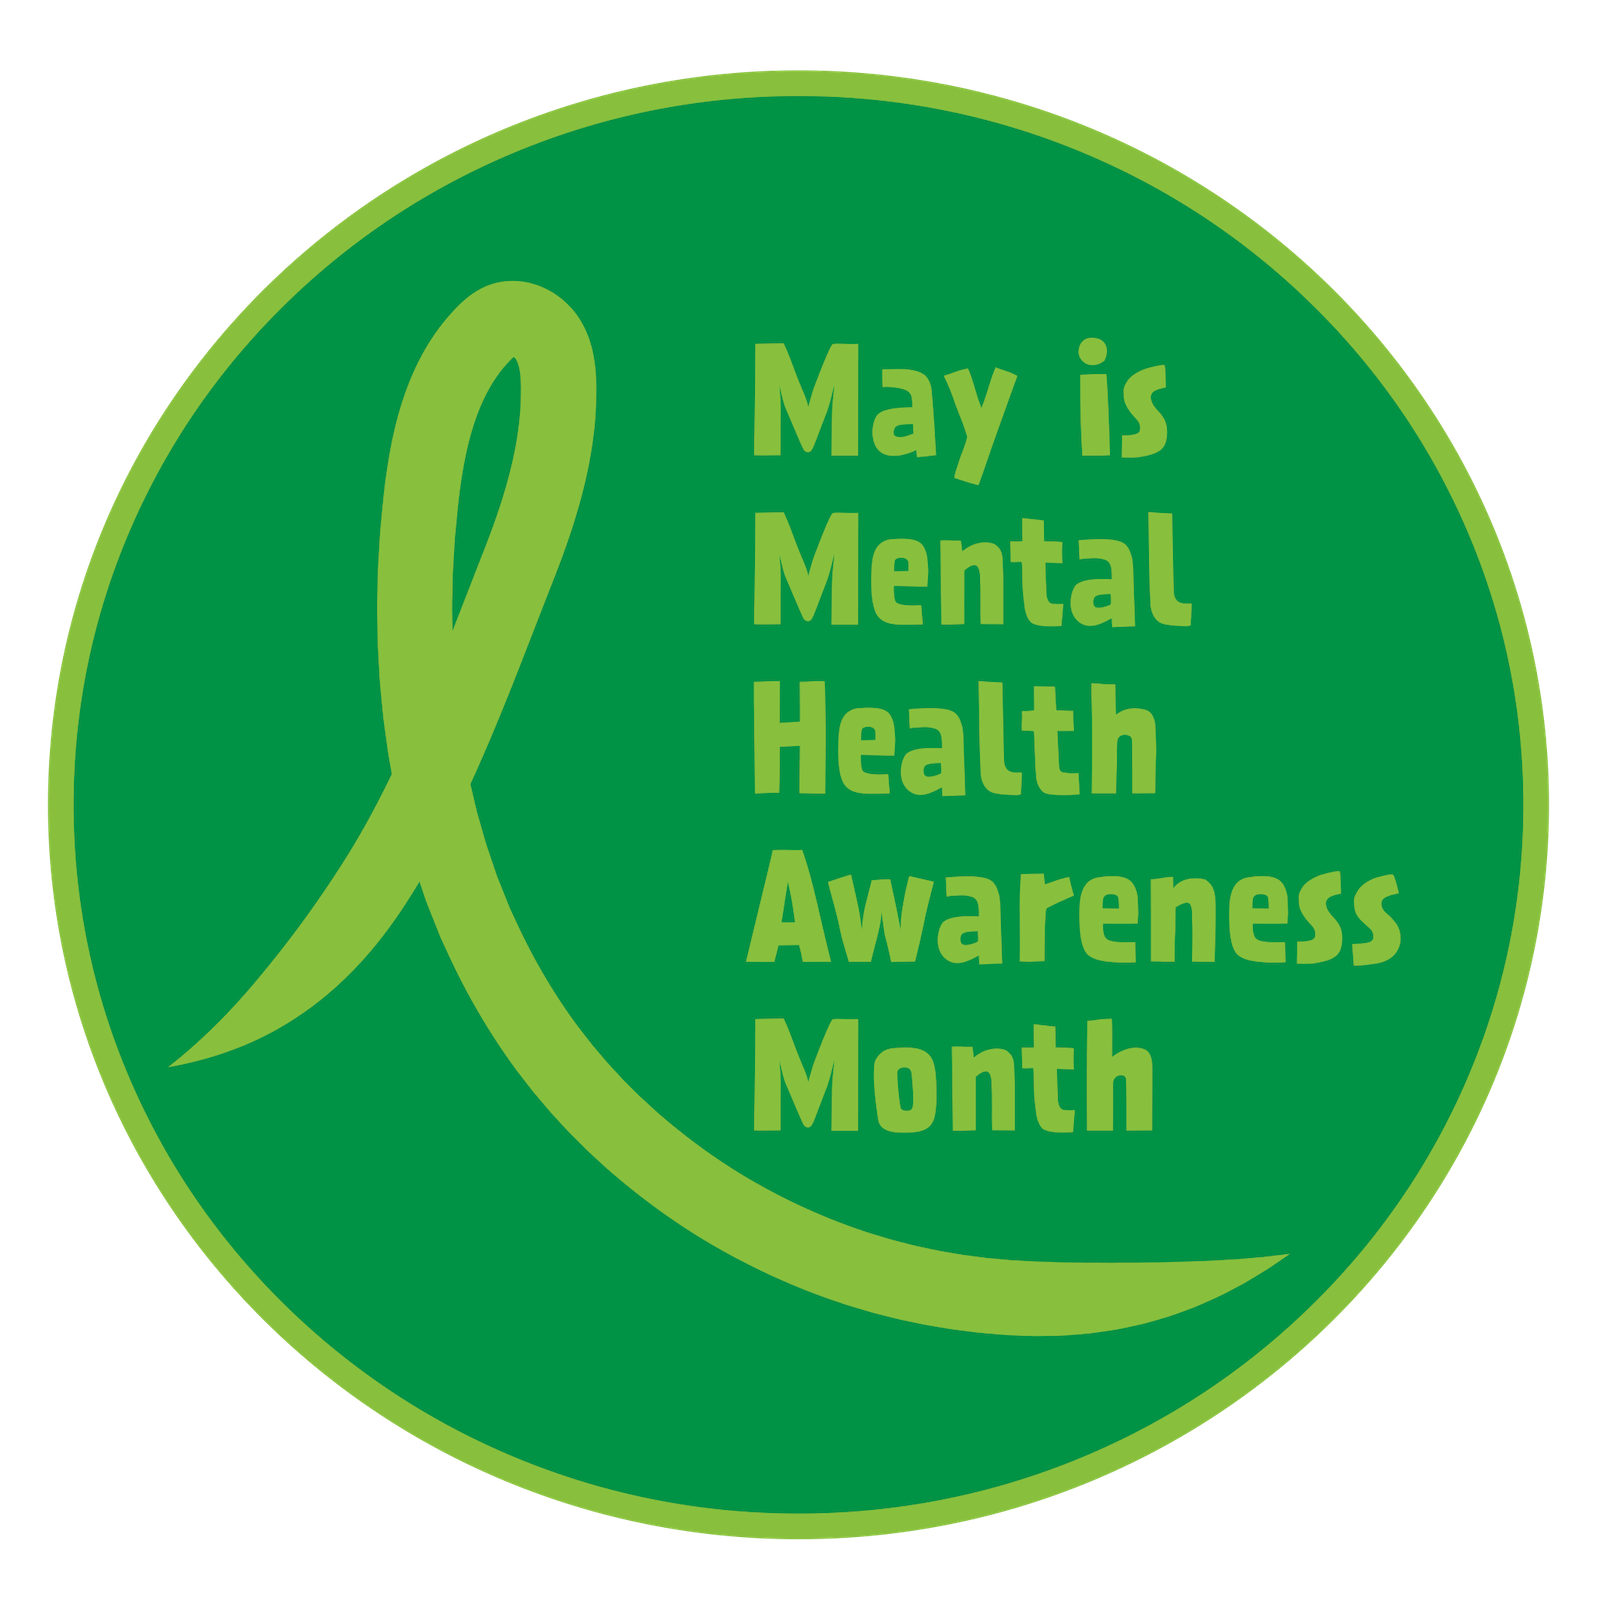 Mental-Health-Awareness-Month-Fred-Meyer-Sons-Baltimore